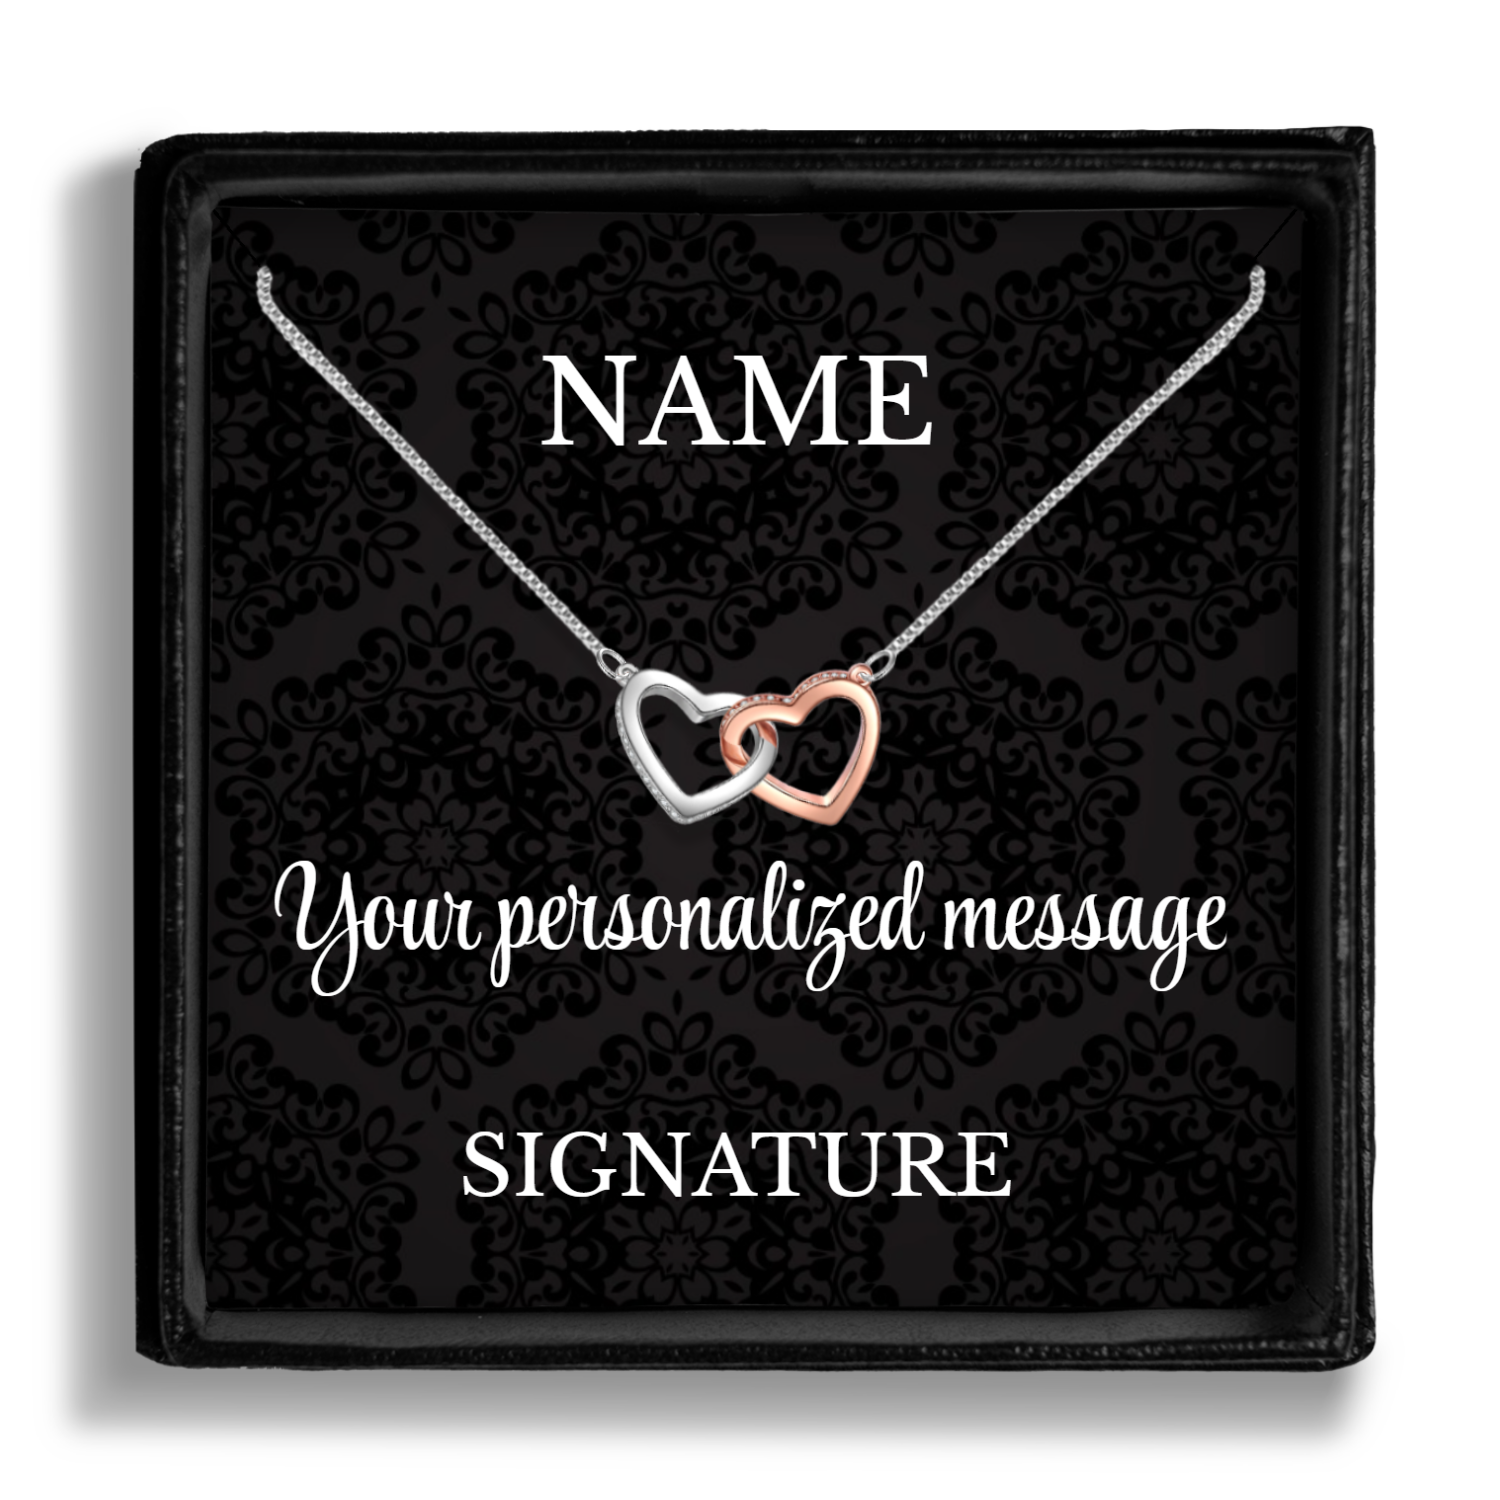 Personalized Necklaces + Message Cards - Personalized Card + Locked Hearts Necklace 